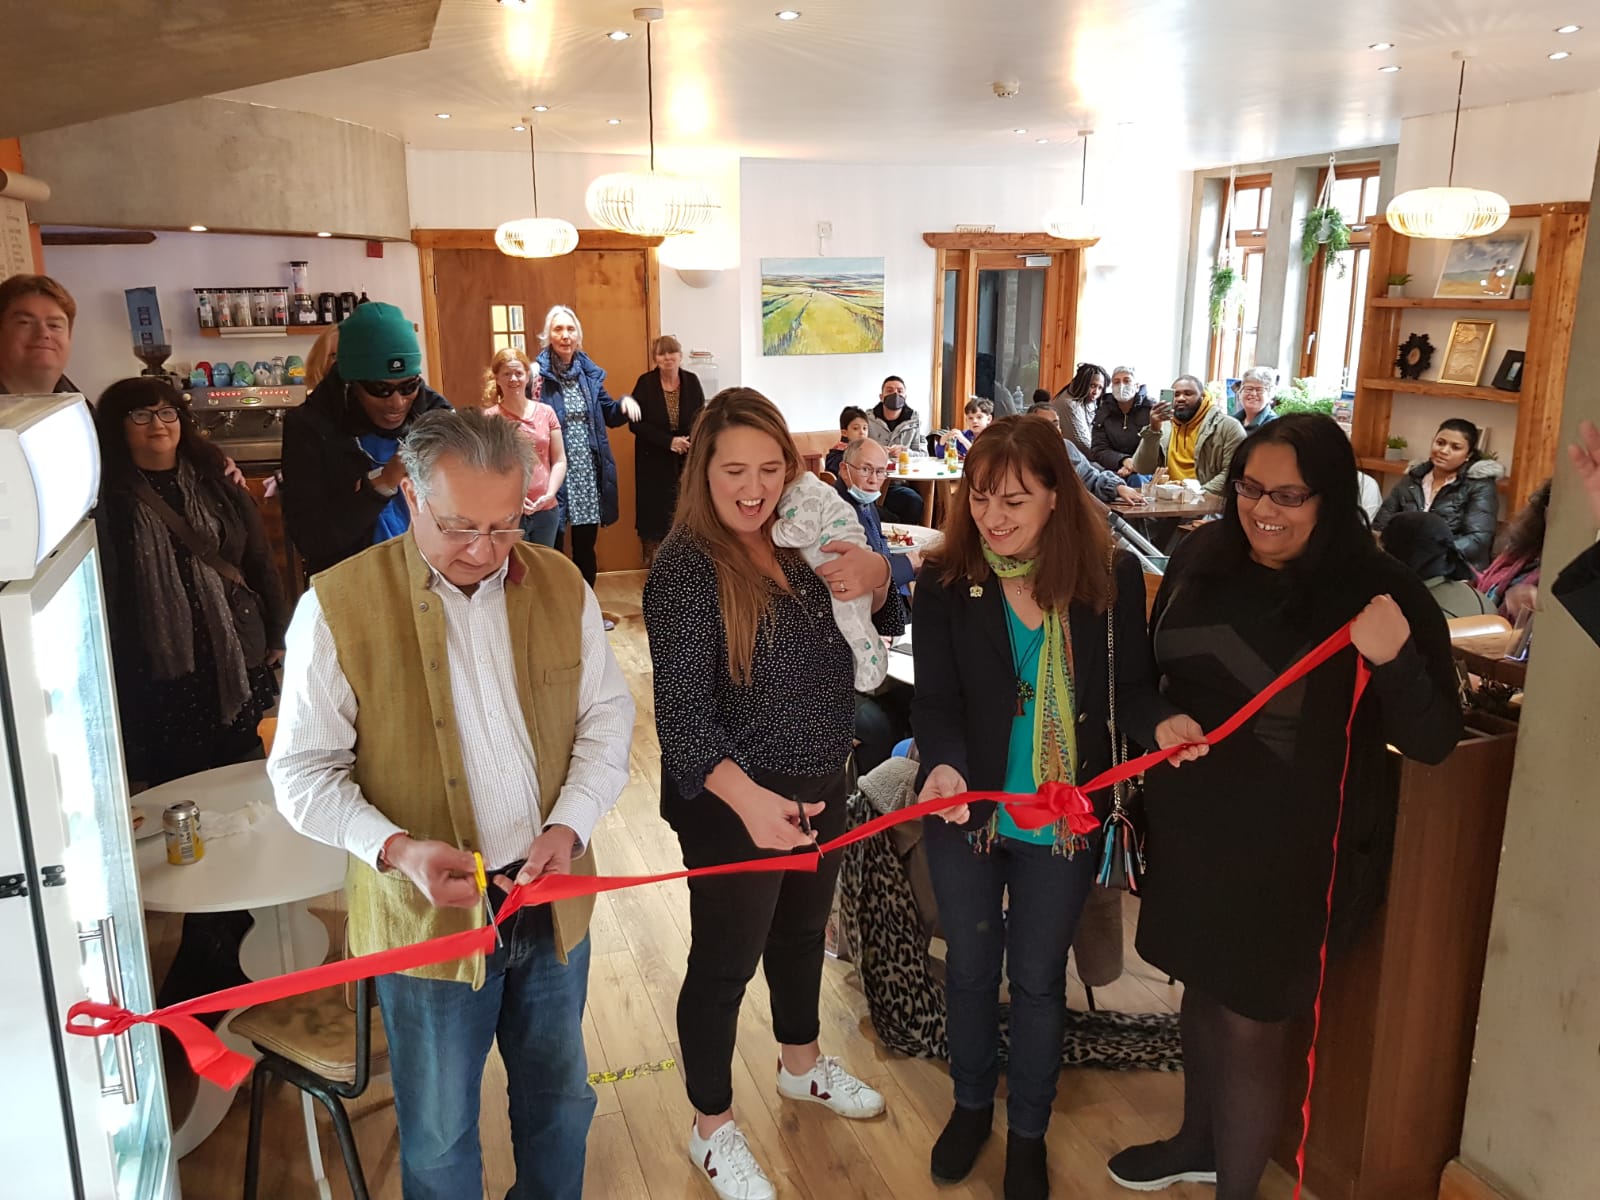 KfT and WoW MUMS sponsored the grand opening of the True Brew Community Café